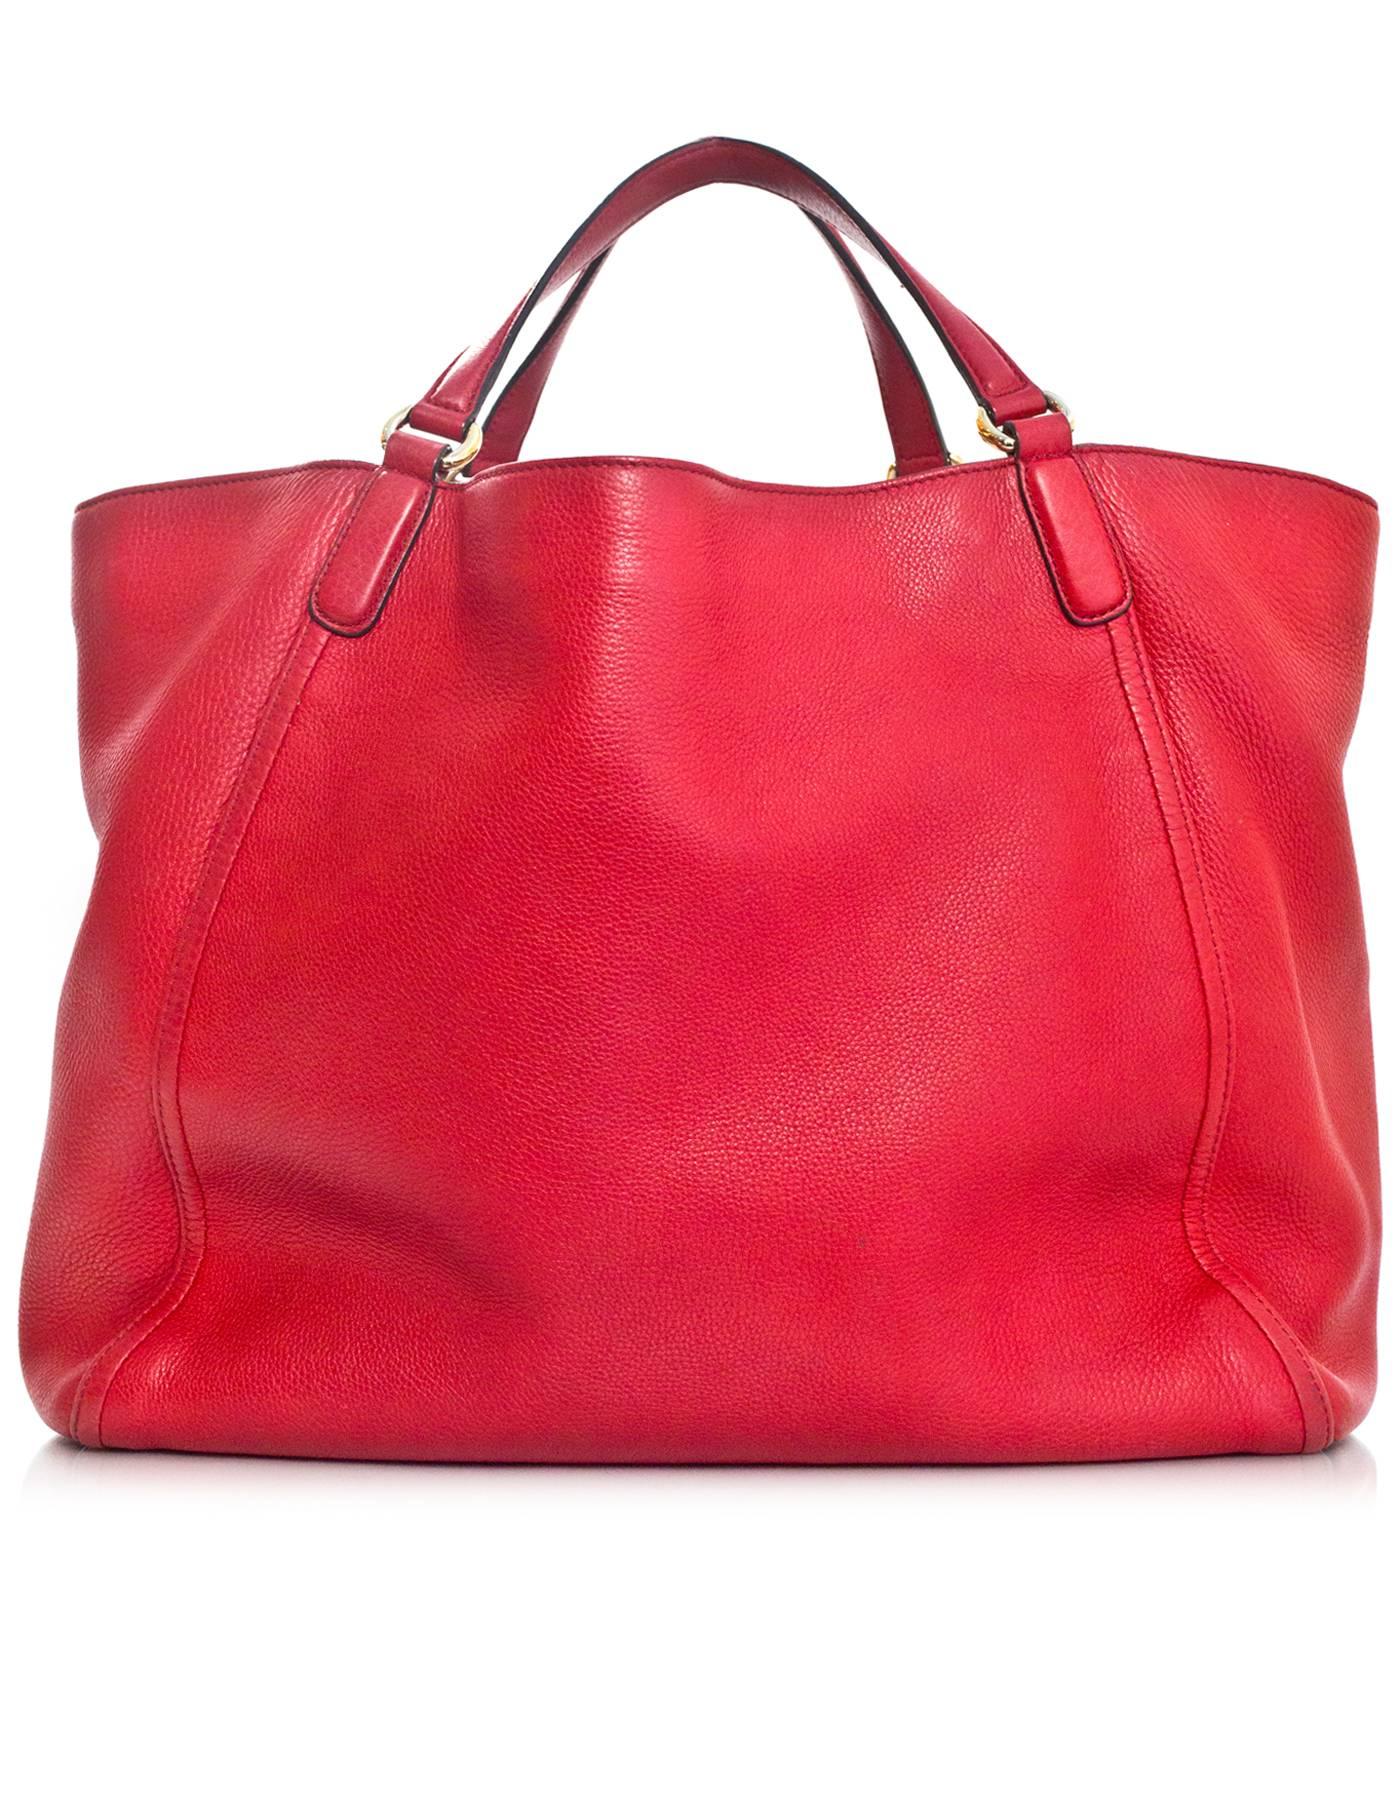 Gucci Red Leather Soho Tote Bag 
Features GG logo stitched at front and optional tassel charm

Made In: Italy
Color: Red
Hardware: Light goldtone
Materials: Leather
Lining: Beige canvas
Closure/Opening: Open with lobster hook at side 
Exterior